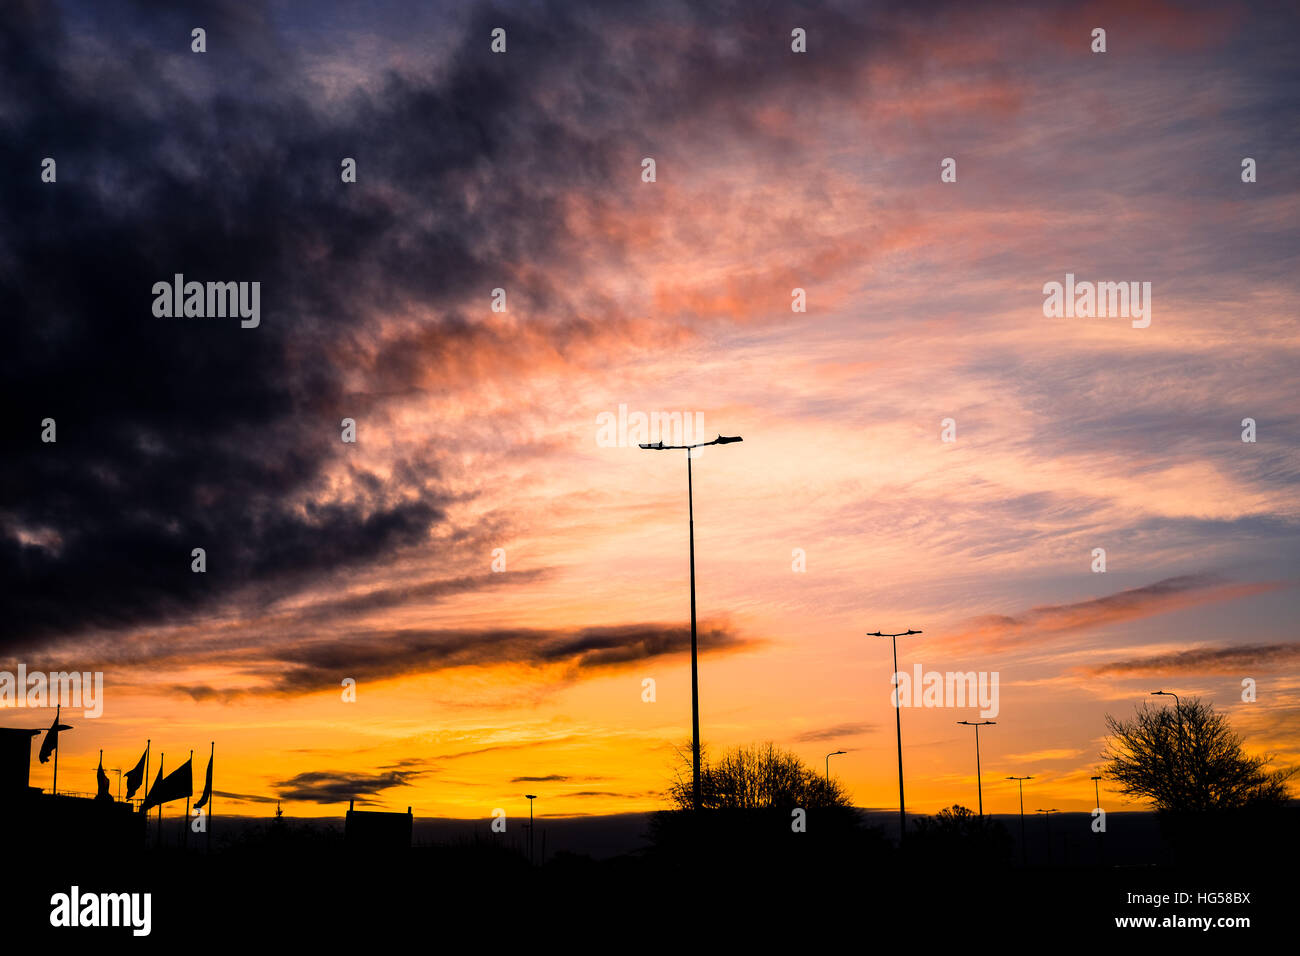 The sun rises over a town as flags blow in the wind Stock Photo